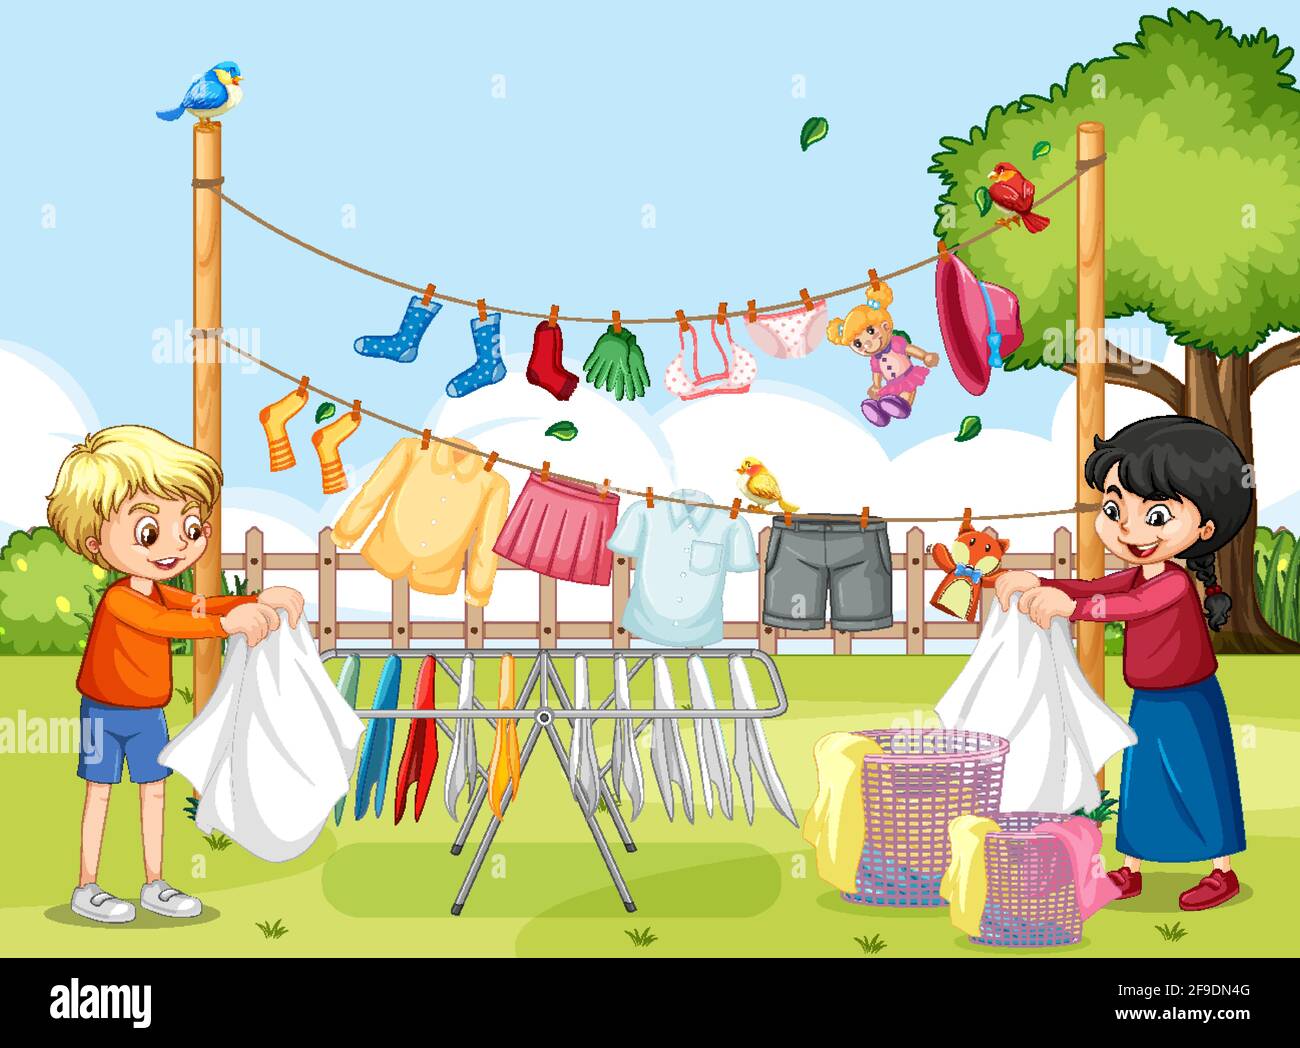 Outdoor scene with children hanging clothes on clotheslines illustration Stock Vector